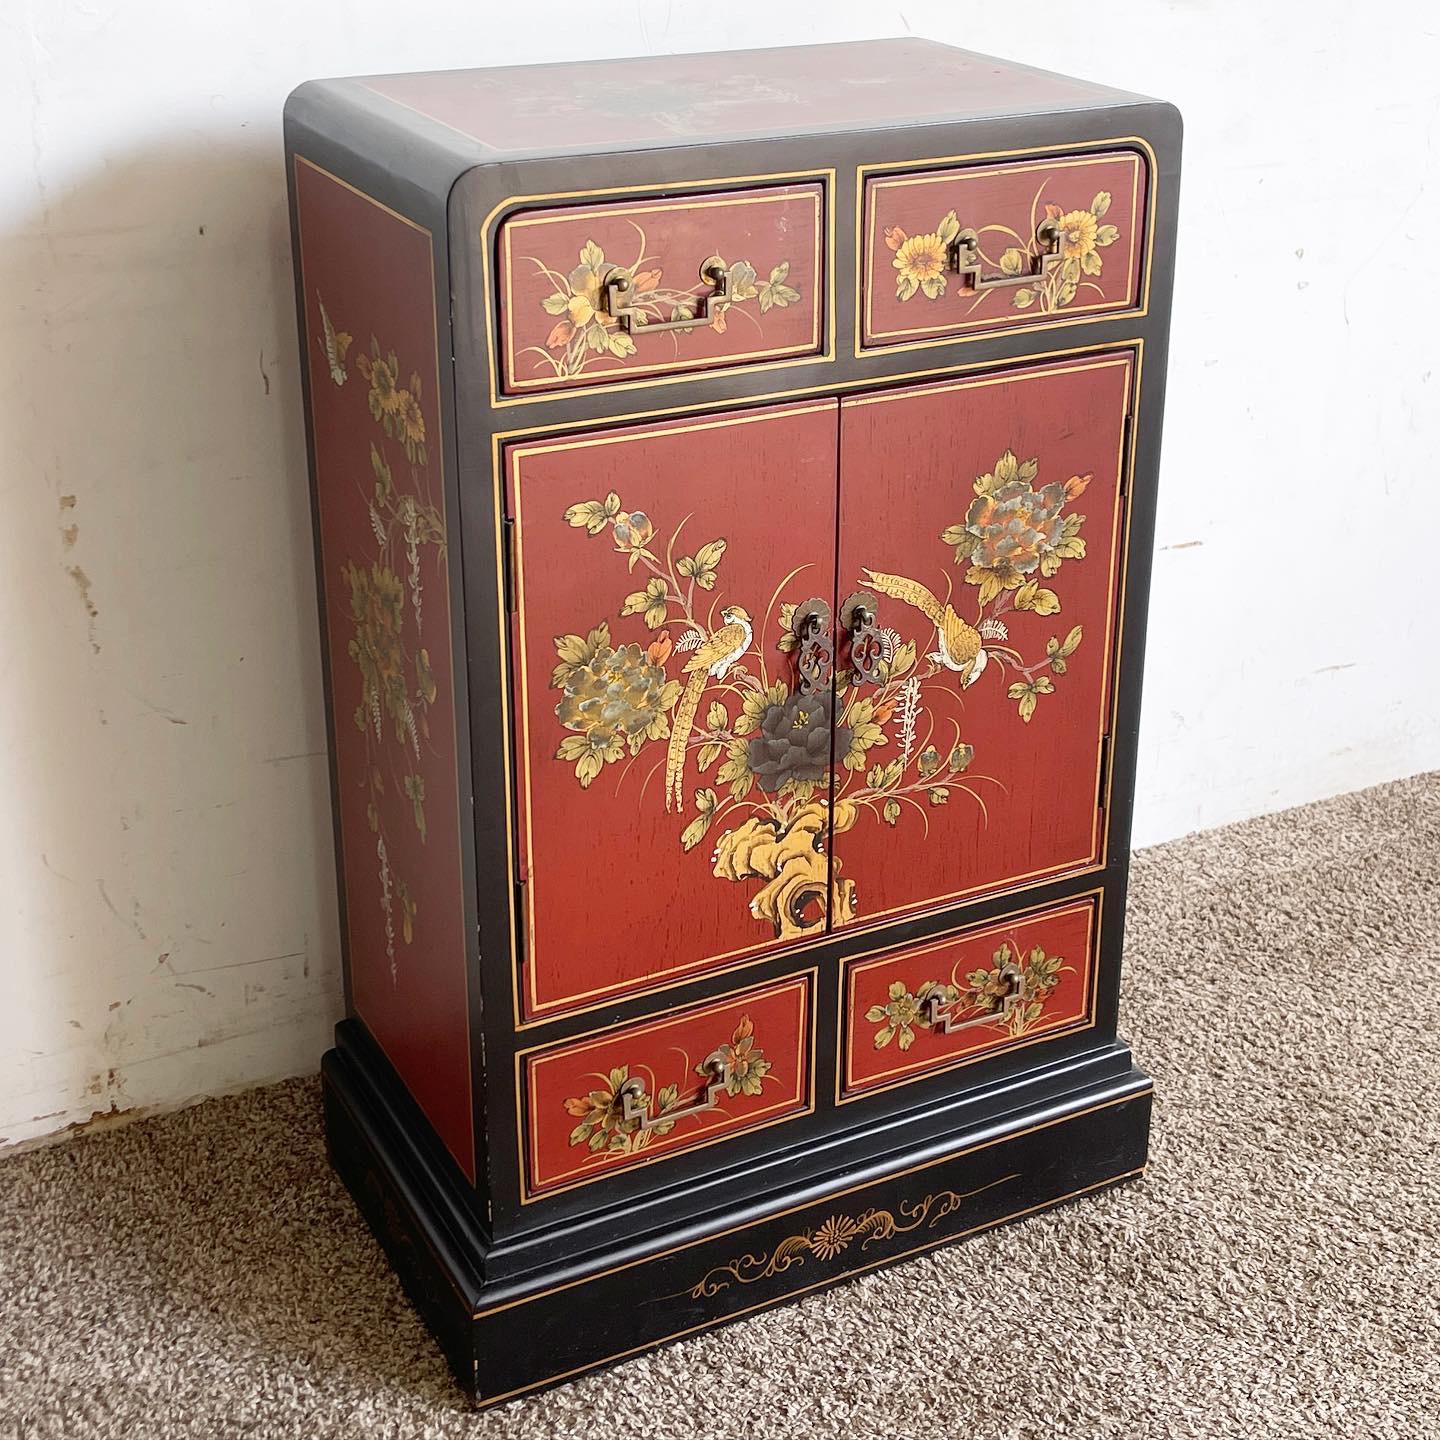 Immerse in the beauty of traditional Chinese artistry with this Red and Black Waterfall Cabinet. Hand-painted with precision, it features birds amidst flora, set against a striking red and black backdrop. The waterfall design, characterized by the